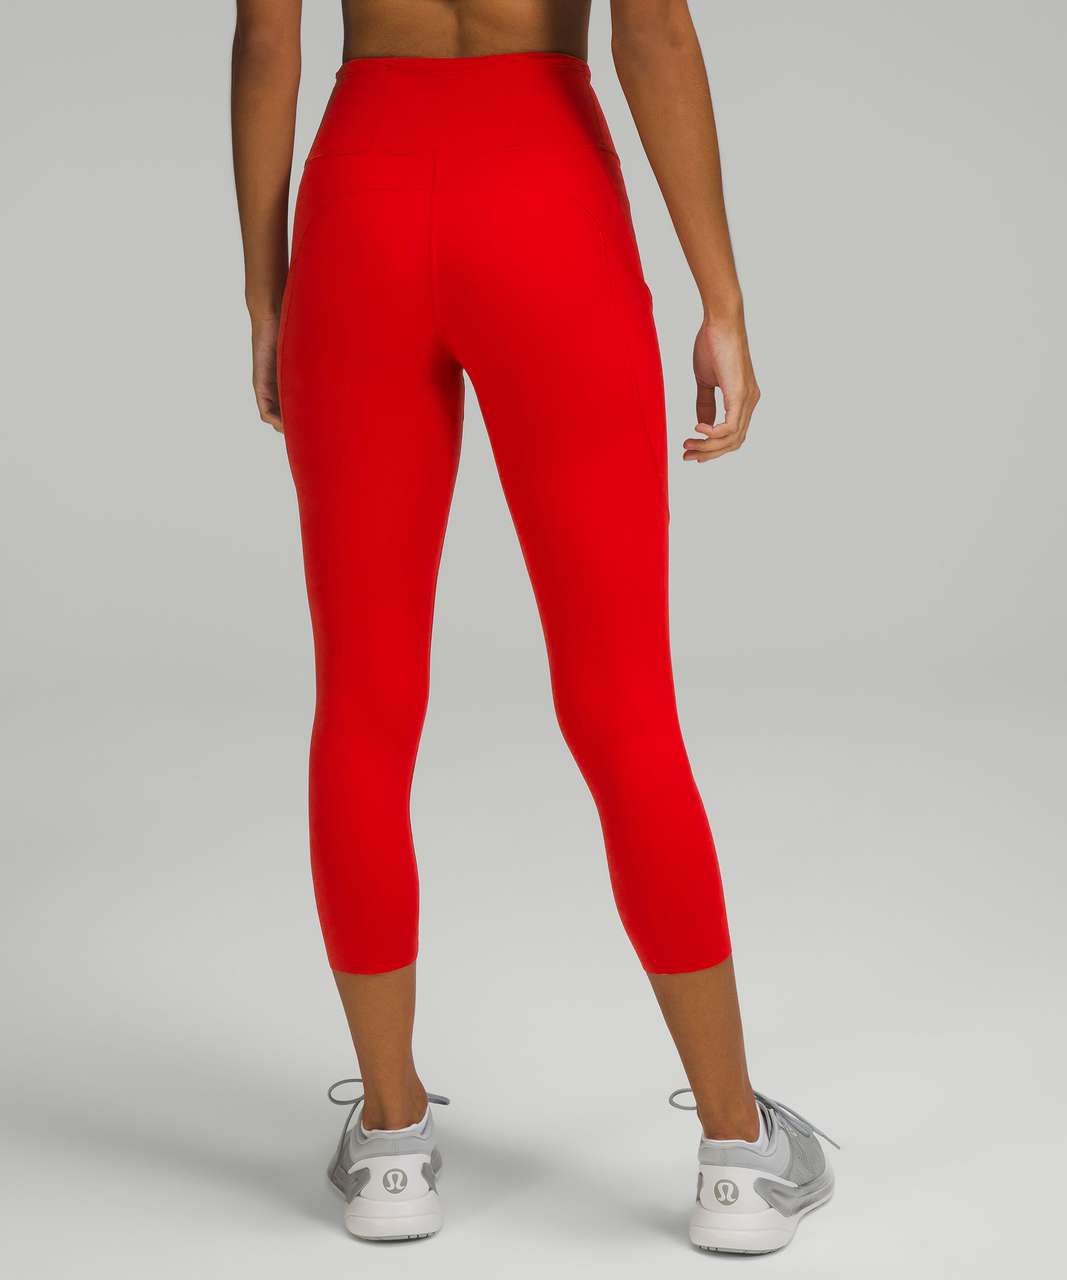 Lululemon Fast and Free High-Rise Crop 23" *Brushed Nulux - Dark Red